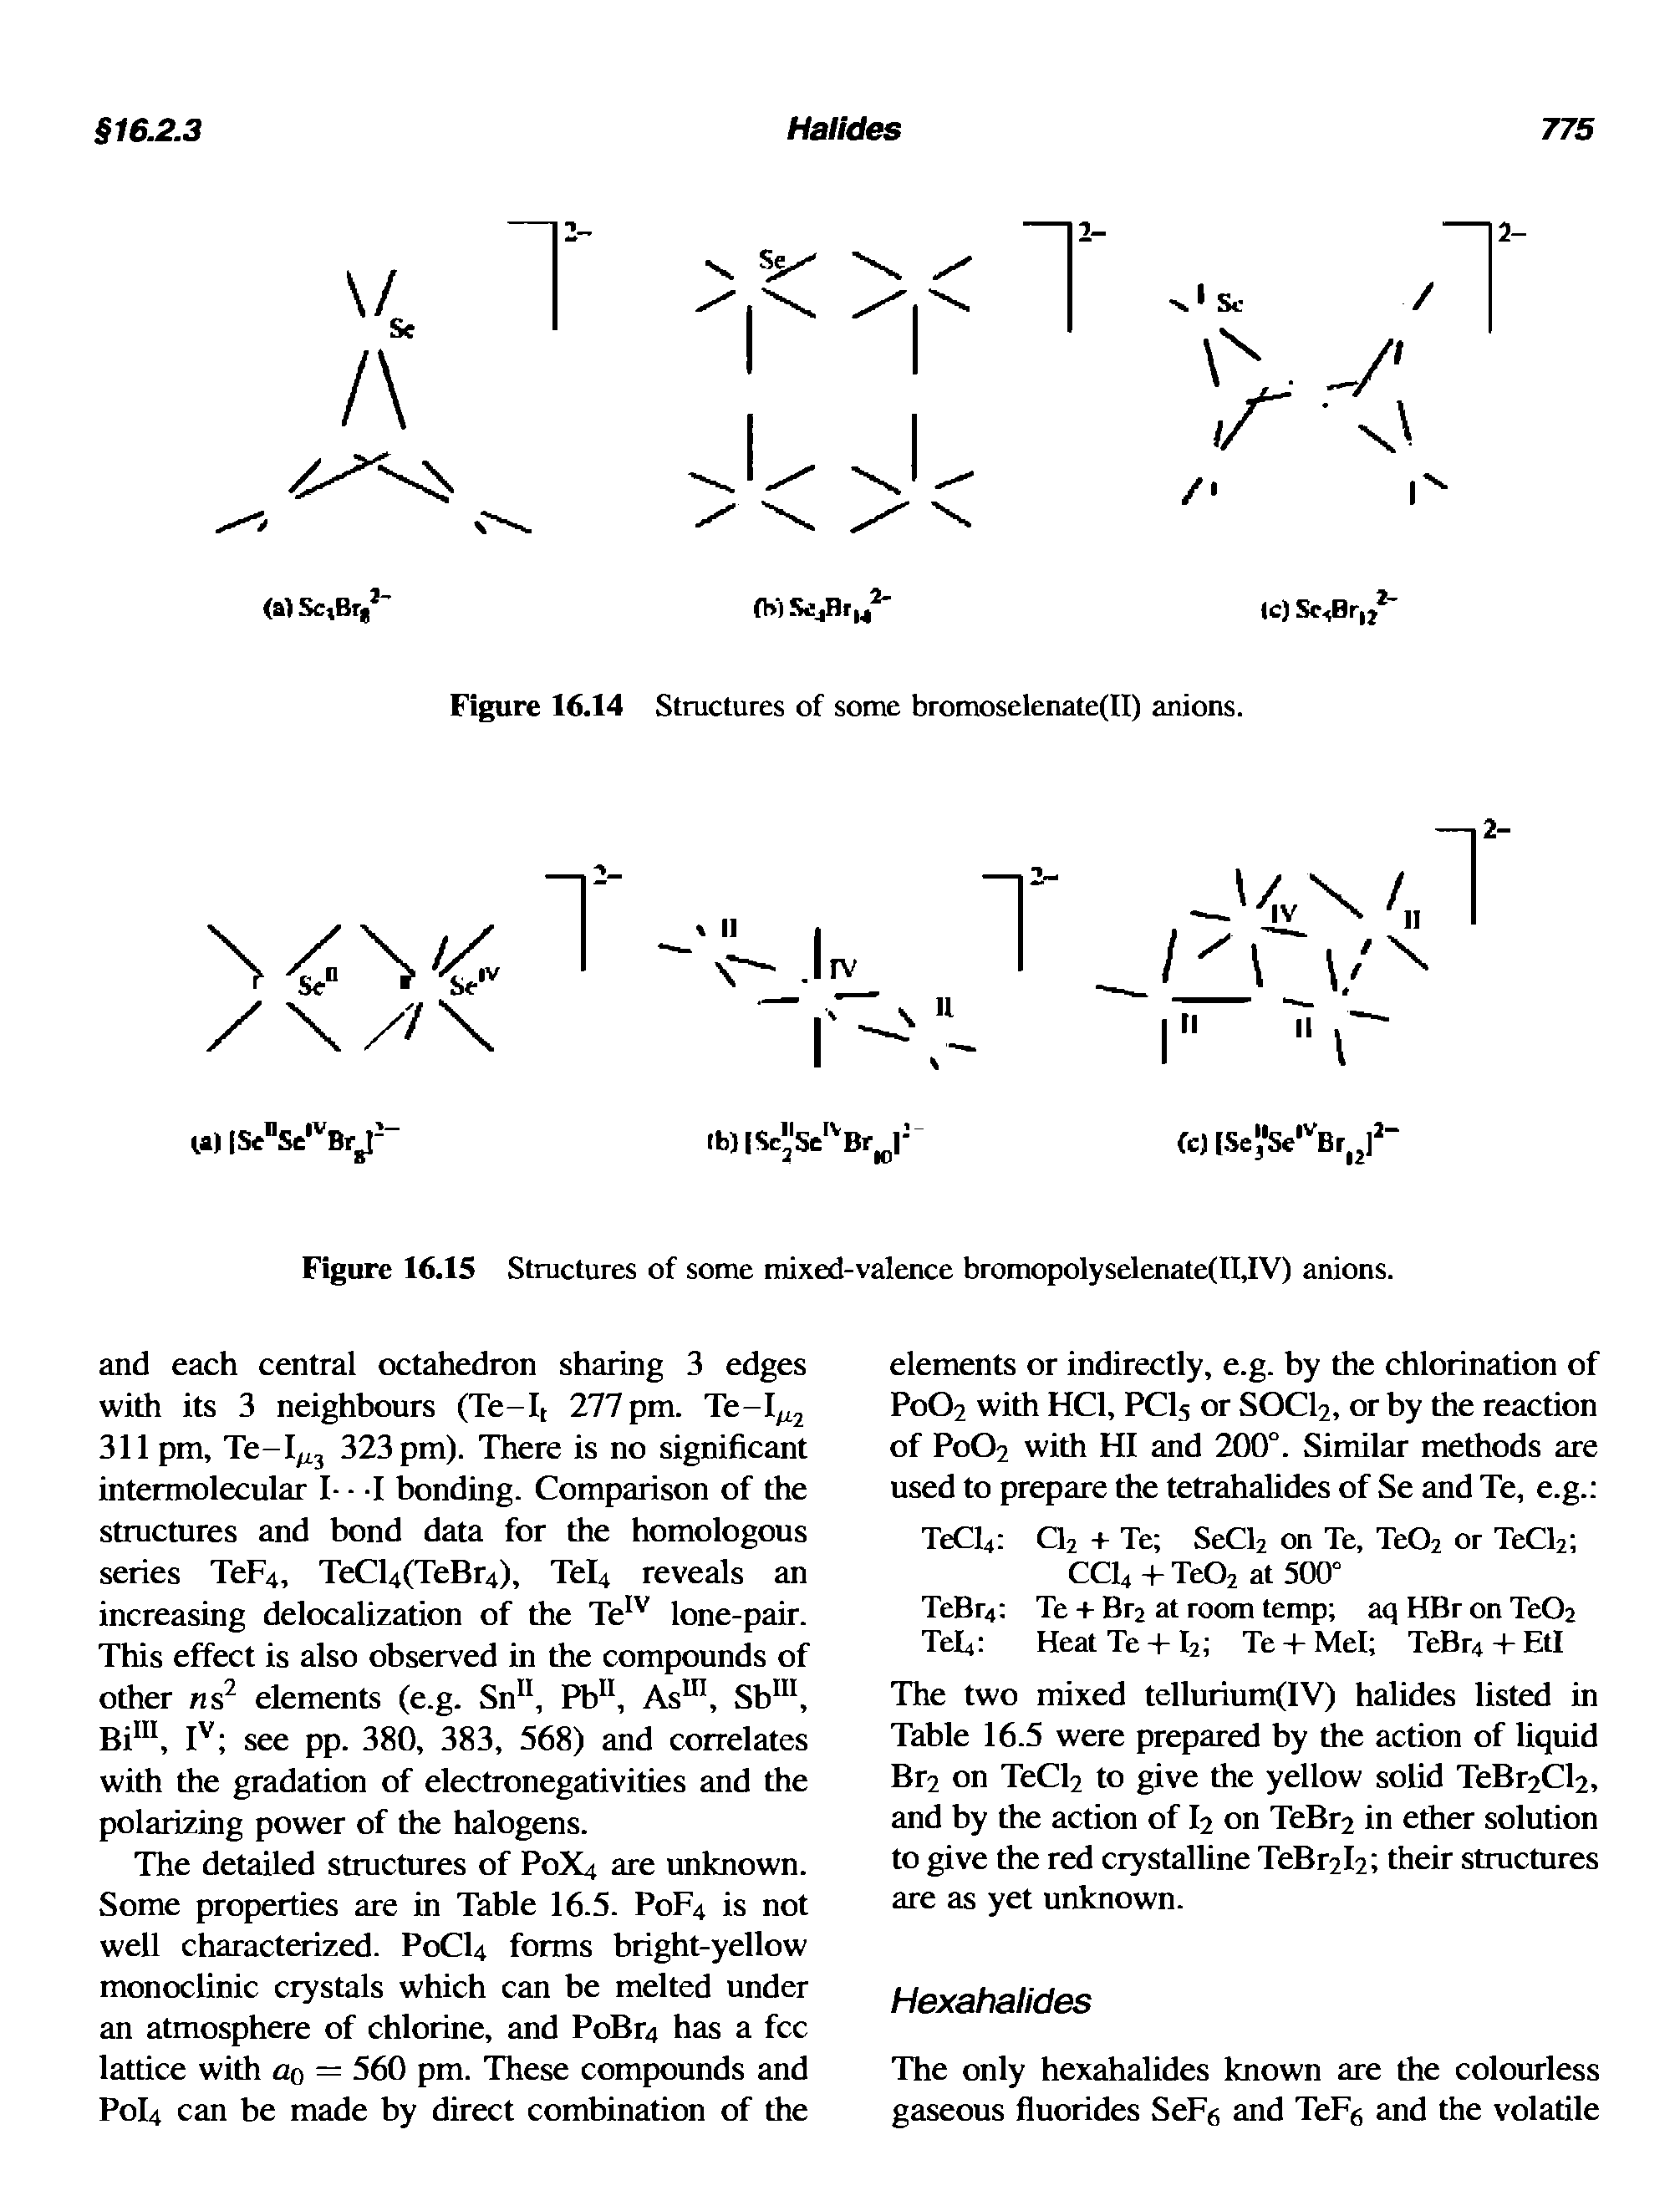 Figure 16.15 Structures of some mixed-valence bromopolyselenate(II,IV) anions.